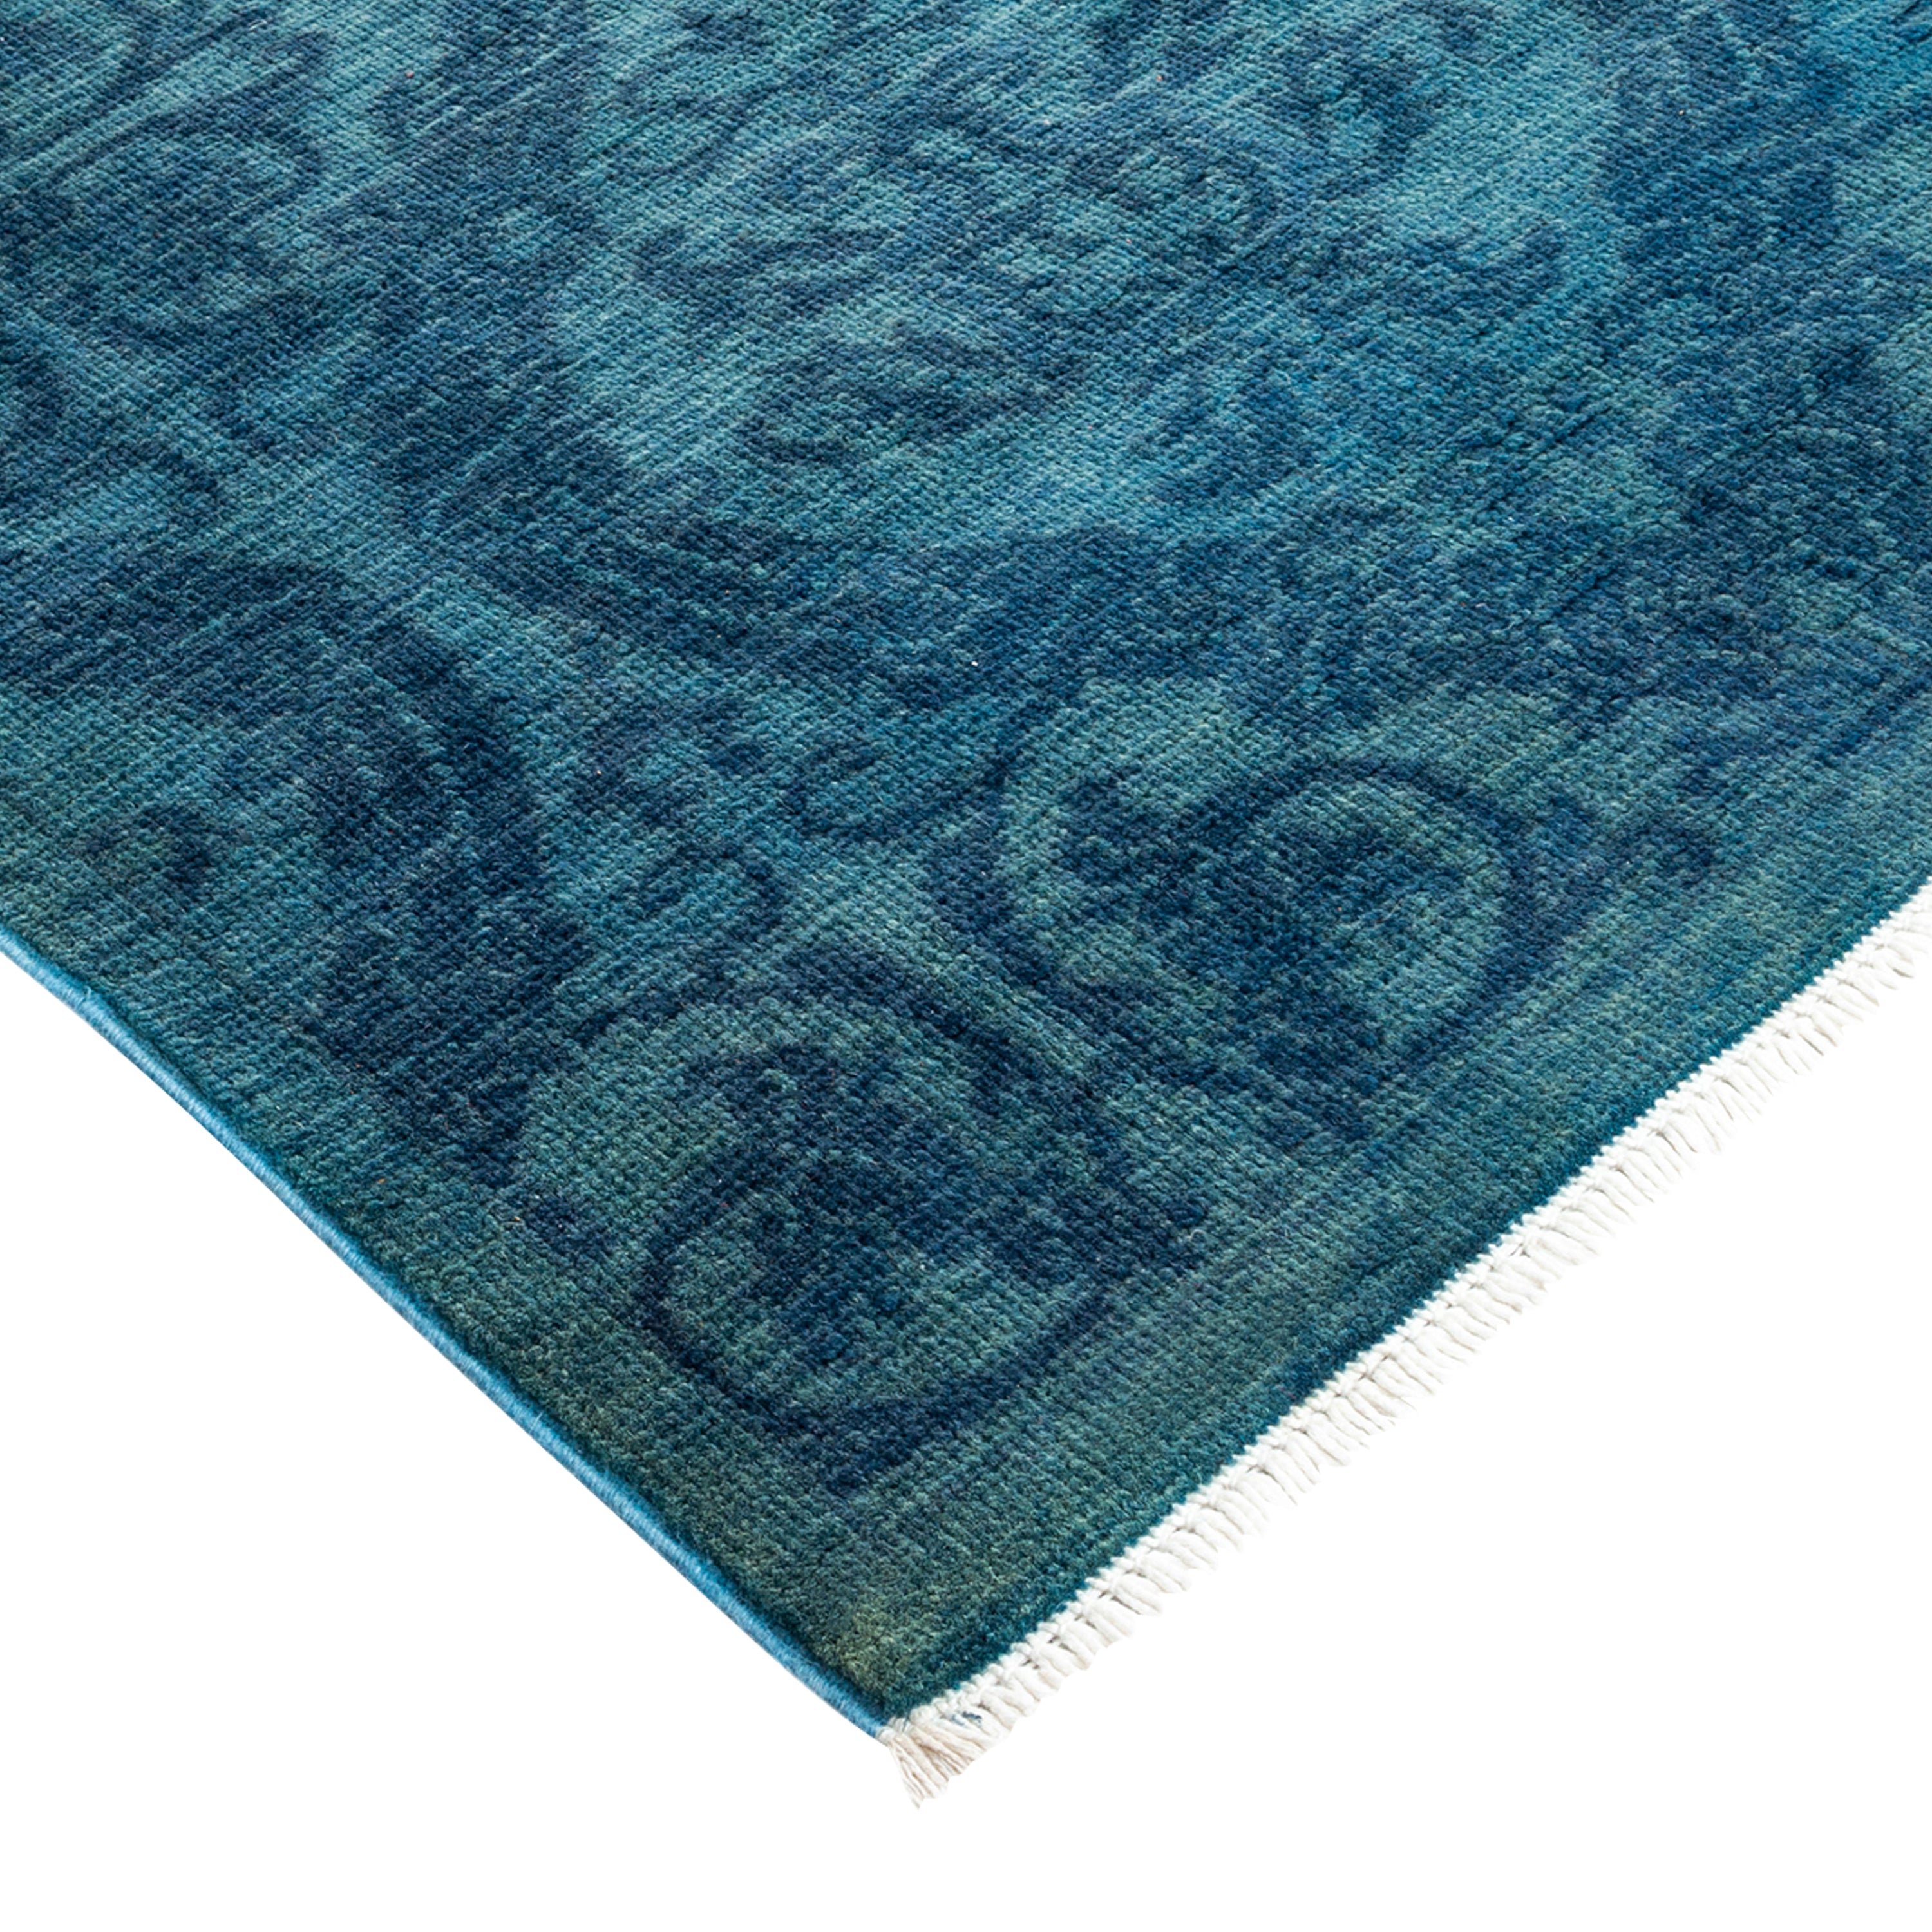 Overdyed Blue Wool Rug - 5'1" x 7'6" Default Title